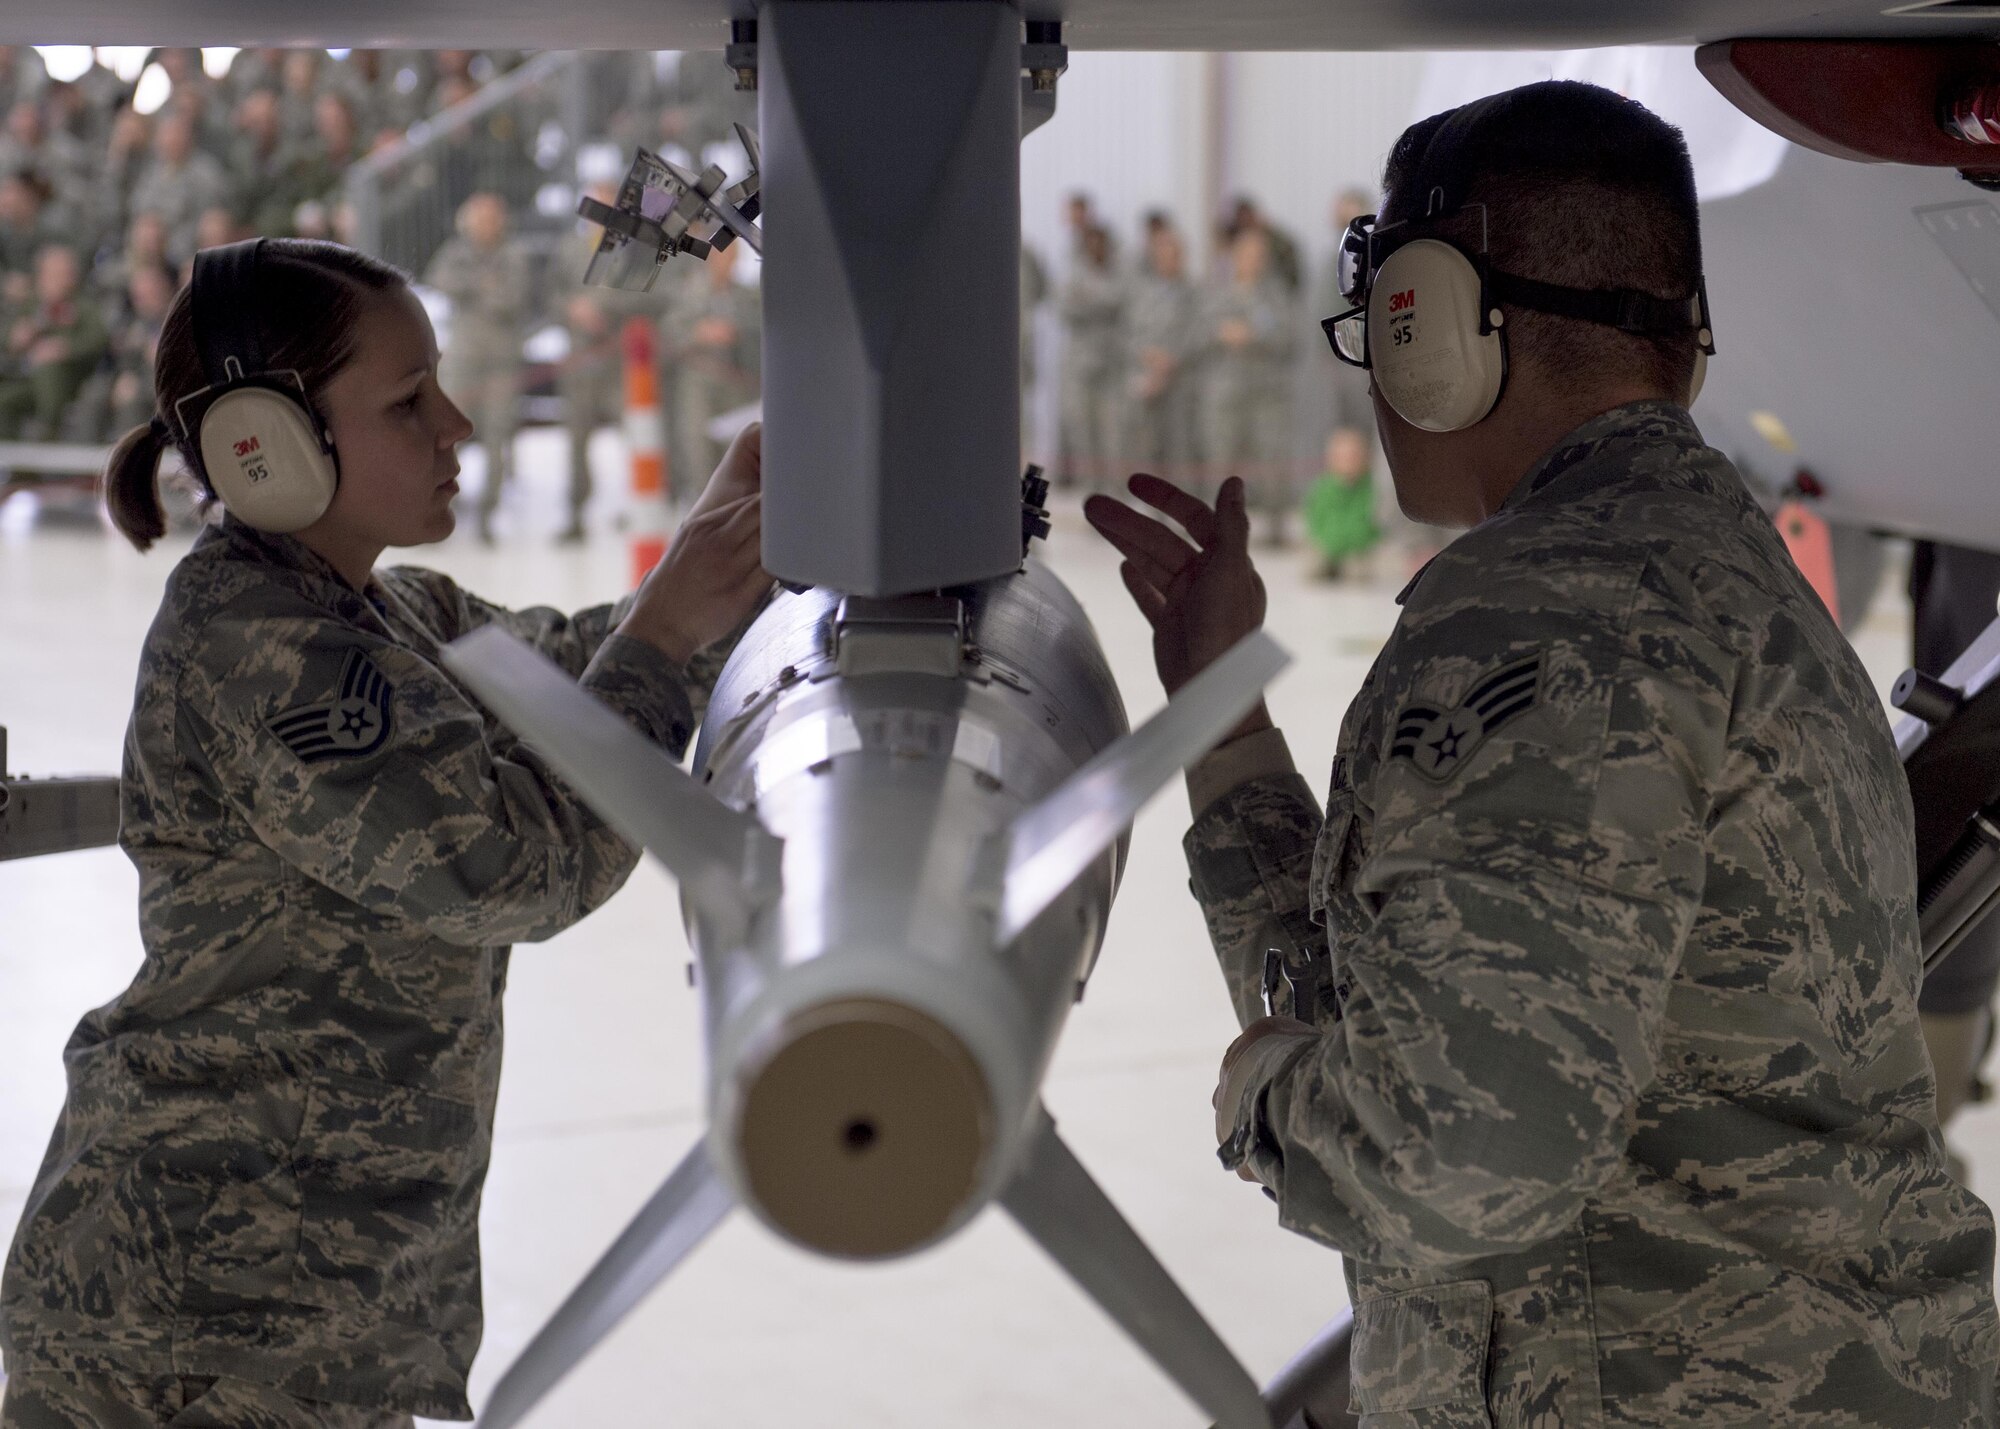 Members of the 49th Wing Maintenance Group inspect an inert munition before loading it onto an MQ-9 Reaper during a quarterly load crew competition at Holloman Air Force Base, N.M., Jan. 20, 2016. The weapons load crews for German Air Force Tornado, F-16 Fighting Falcon and MQ-9 Reaper competed against each other to load weapons the most efficiently and with the least amount of procedural errors. Points for the competition are awarded based on weapons loading, tool kit inspection and uniform inspection categories. (U.S. Air Force photo by Senior Airman Chase Cannon/ Released)